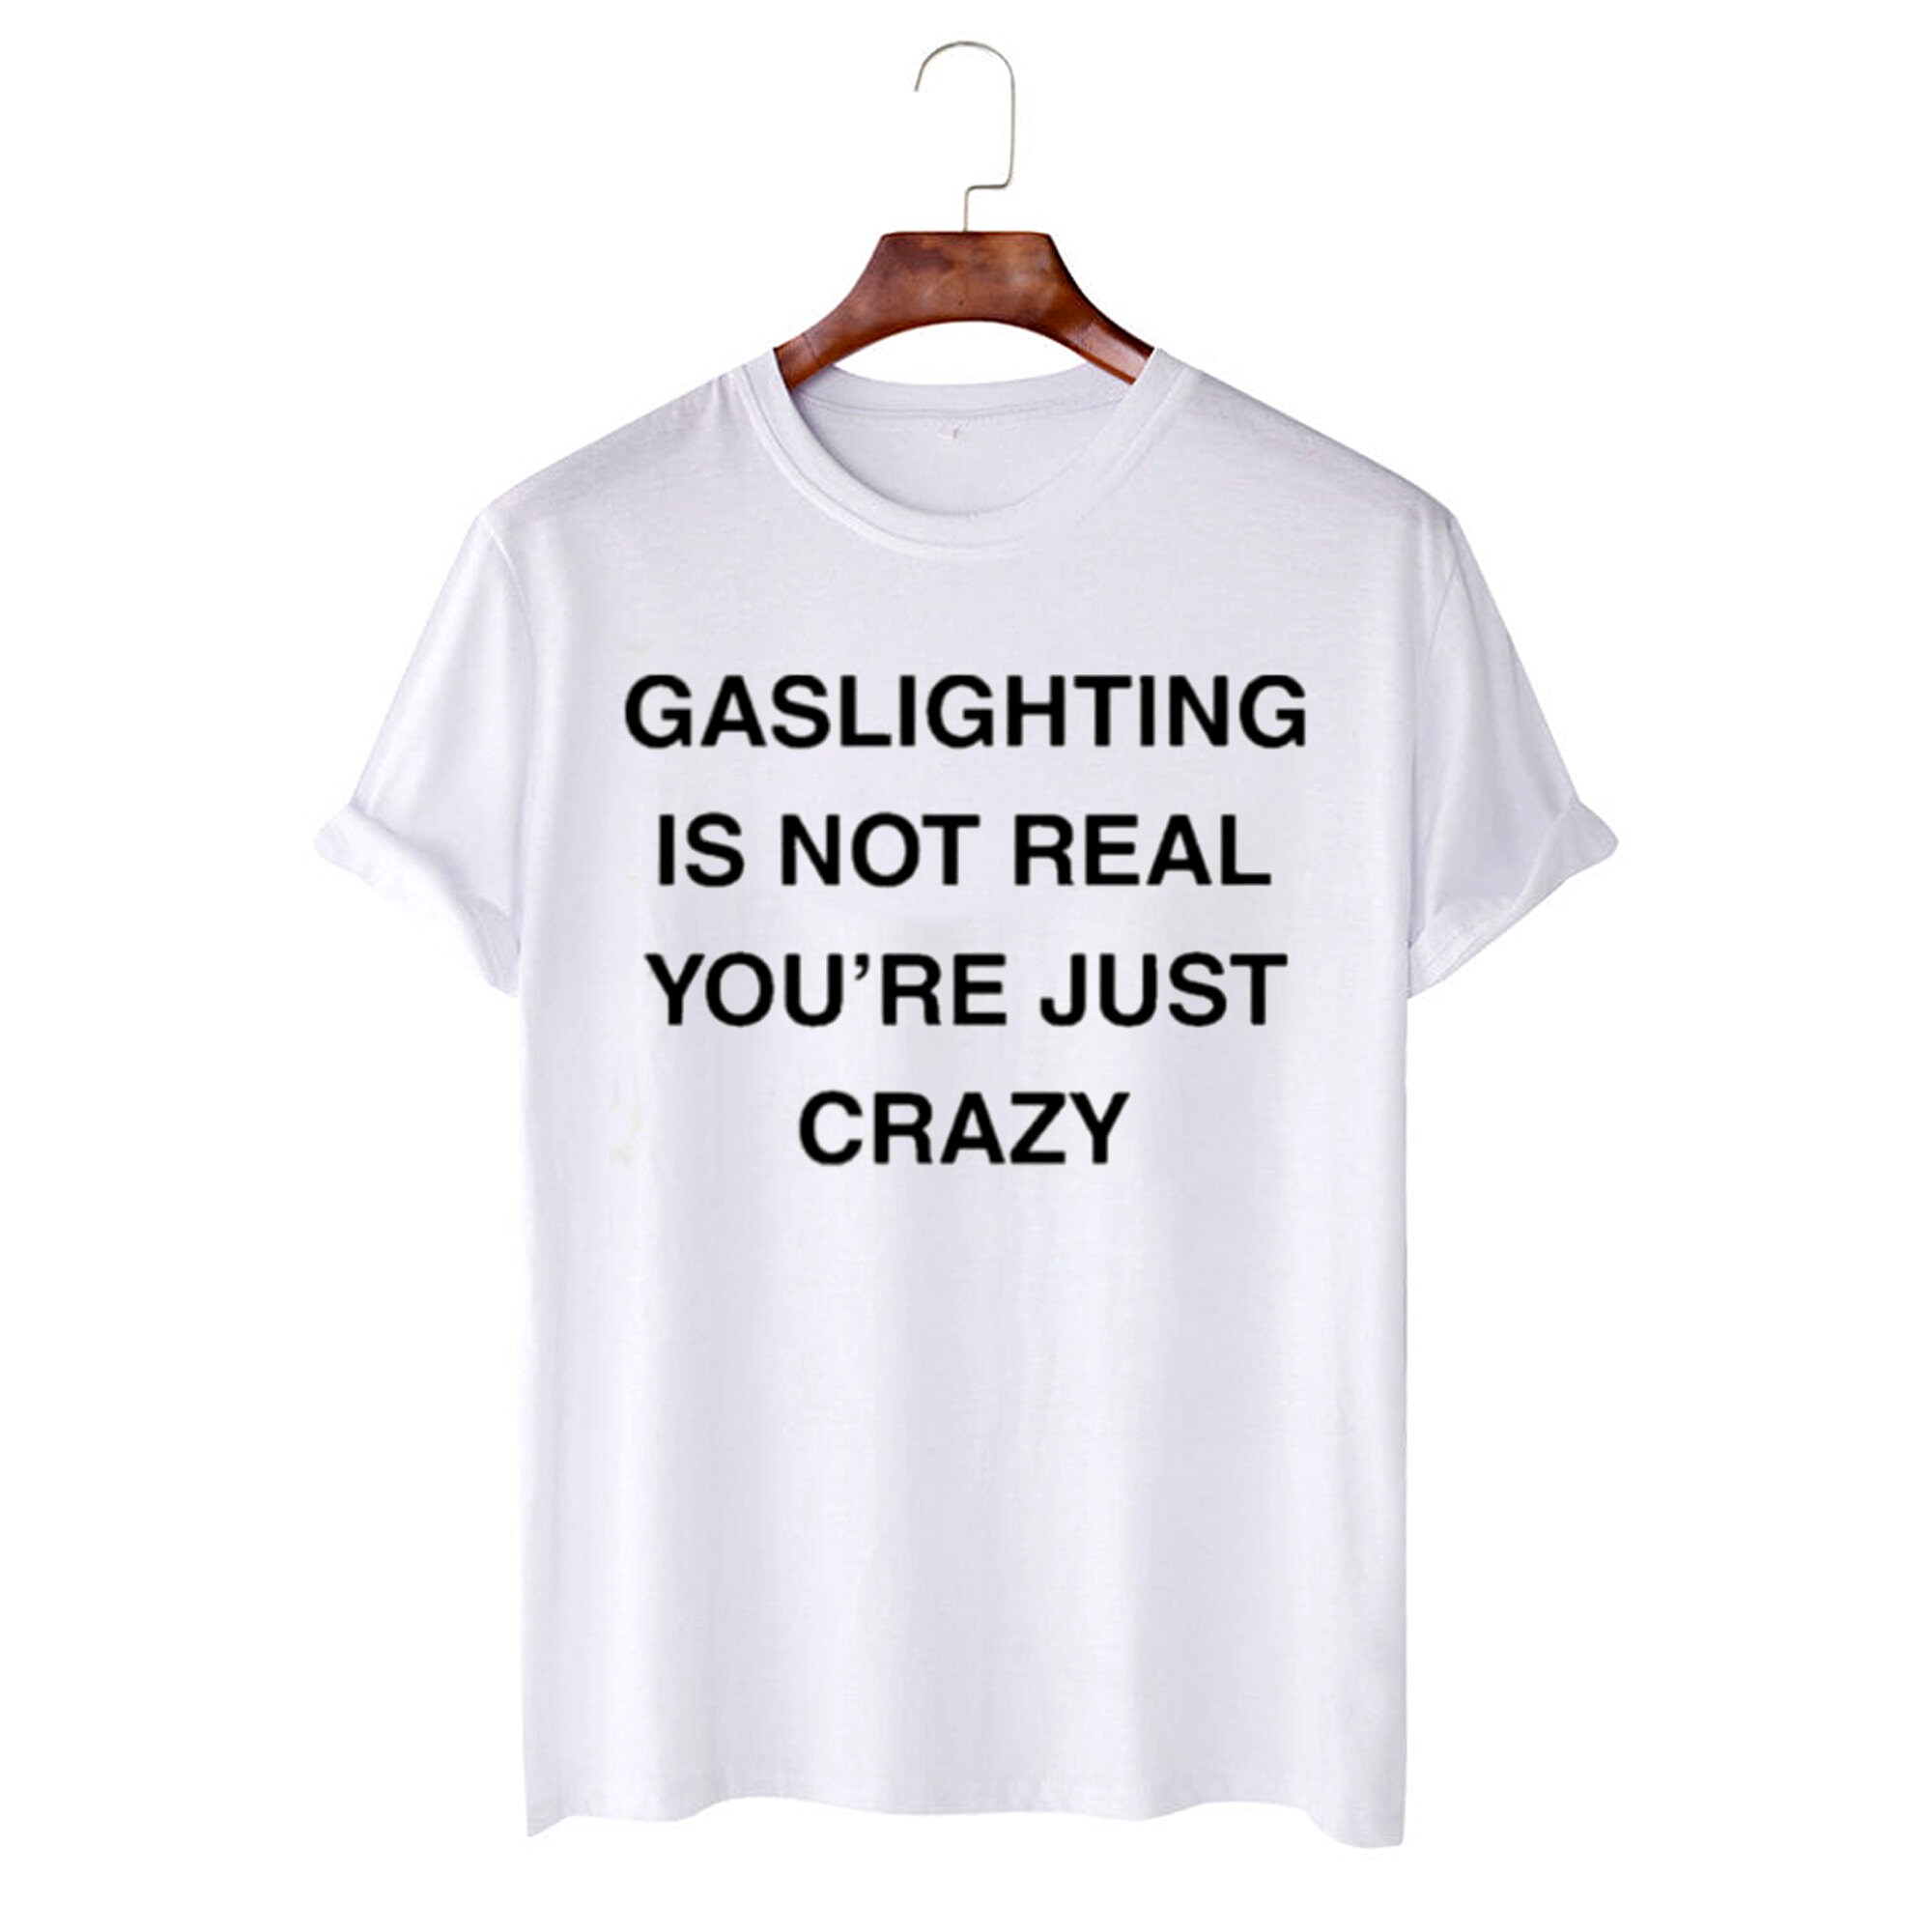 Discover Gaslighting Is Not Real tshirt, Gaslighting Is Not Real You're Just Crazy Shirt